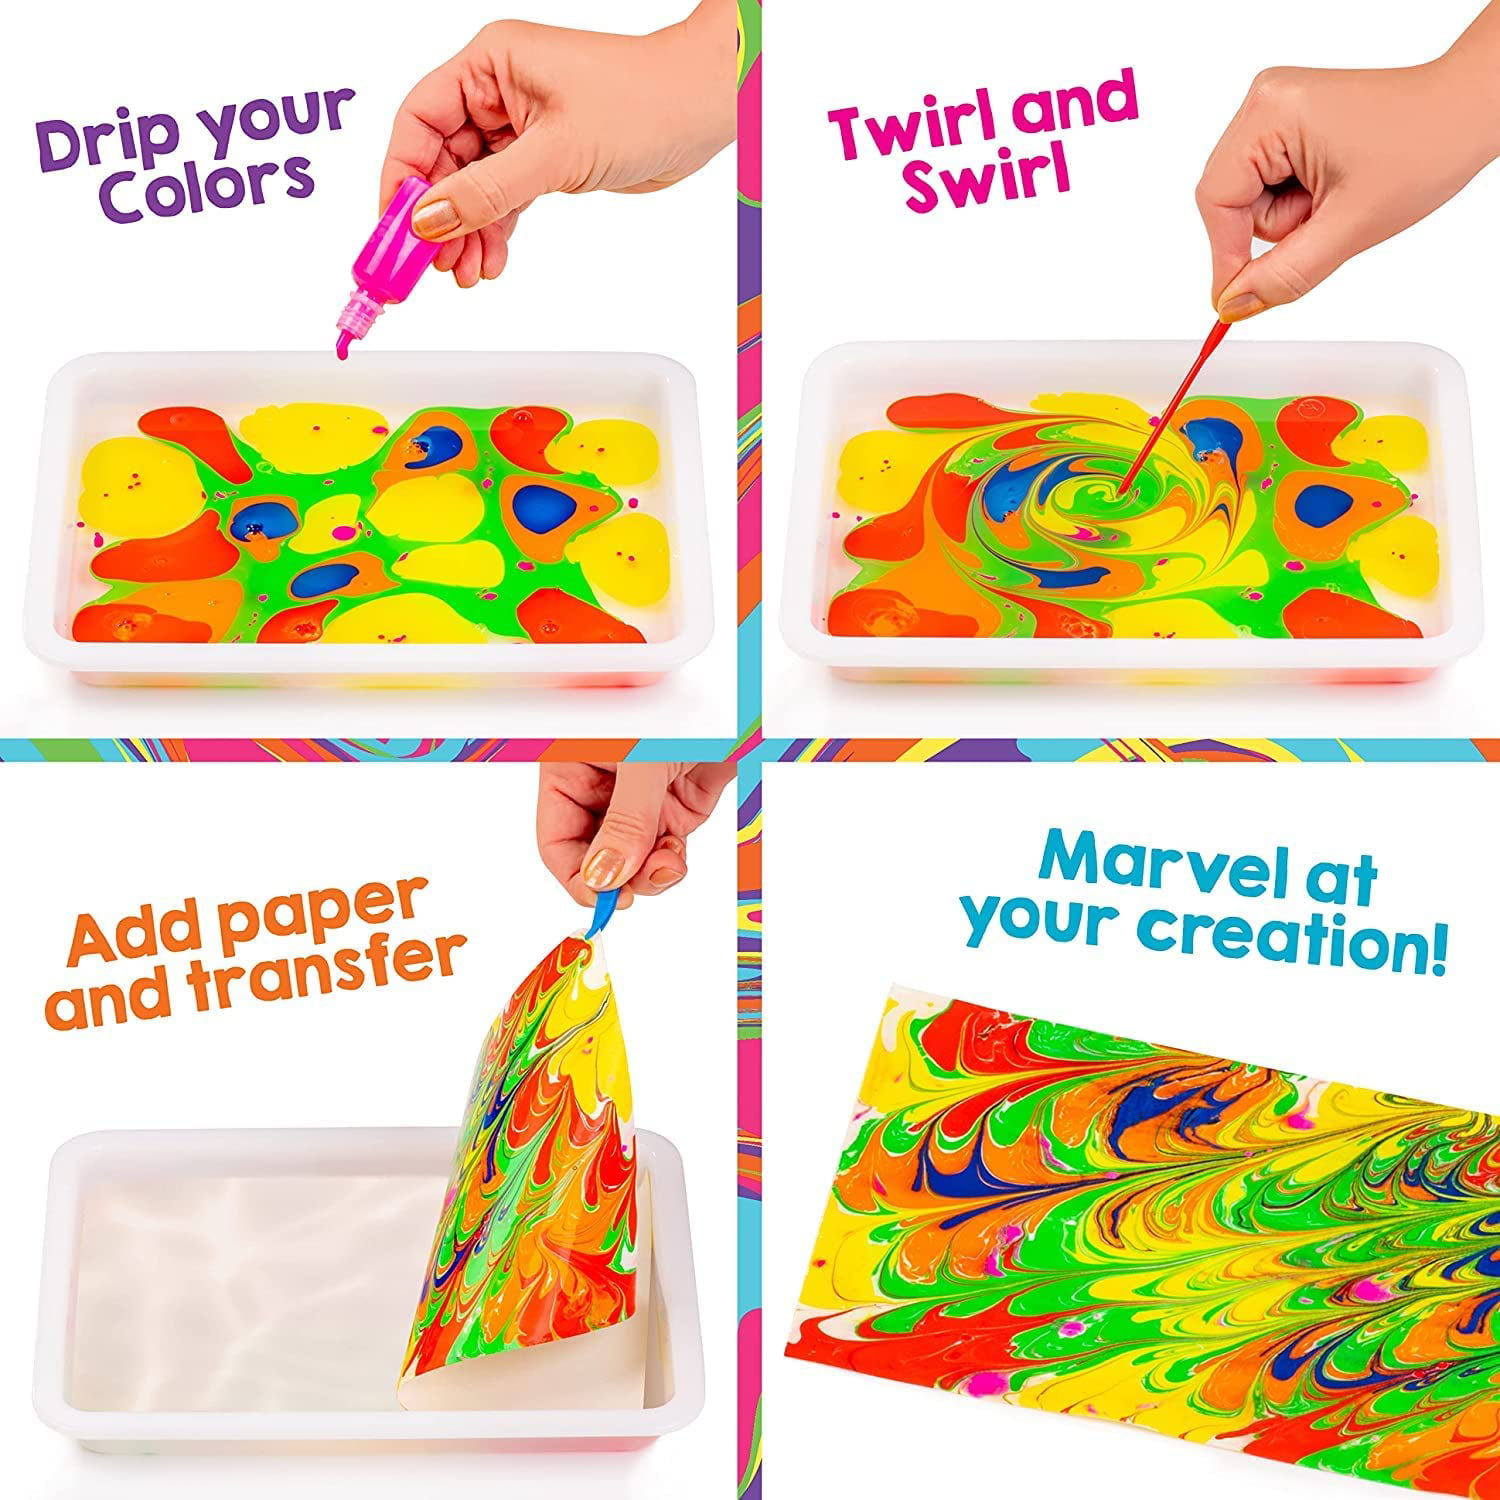 Original Stationery Rainbow Marbling Kit, Everything You Need in One Marble Painting Kit Kids to Make Marble Art and Craft Kids Will Love, Great Arts